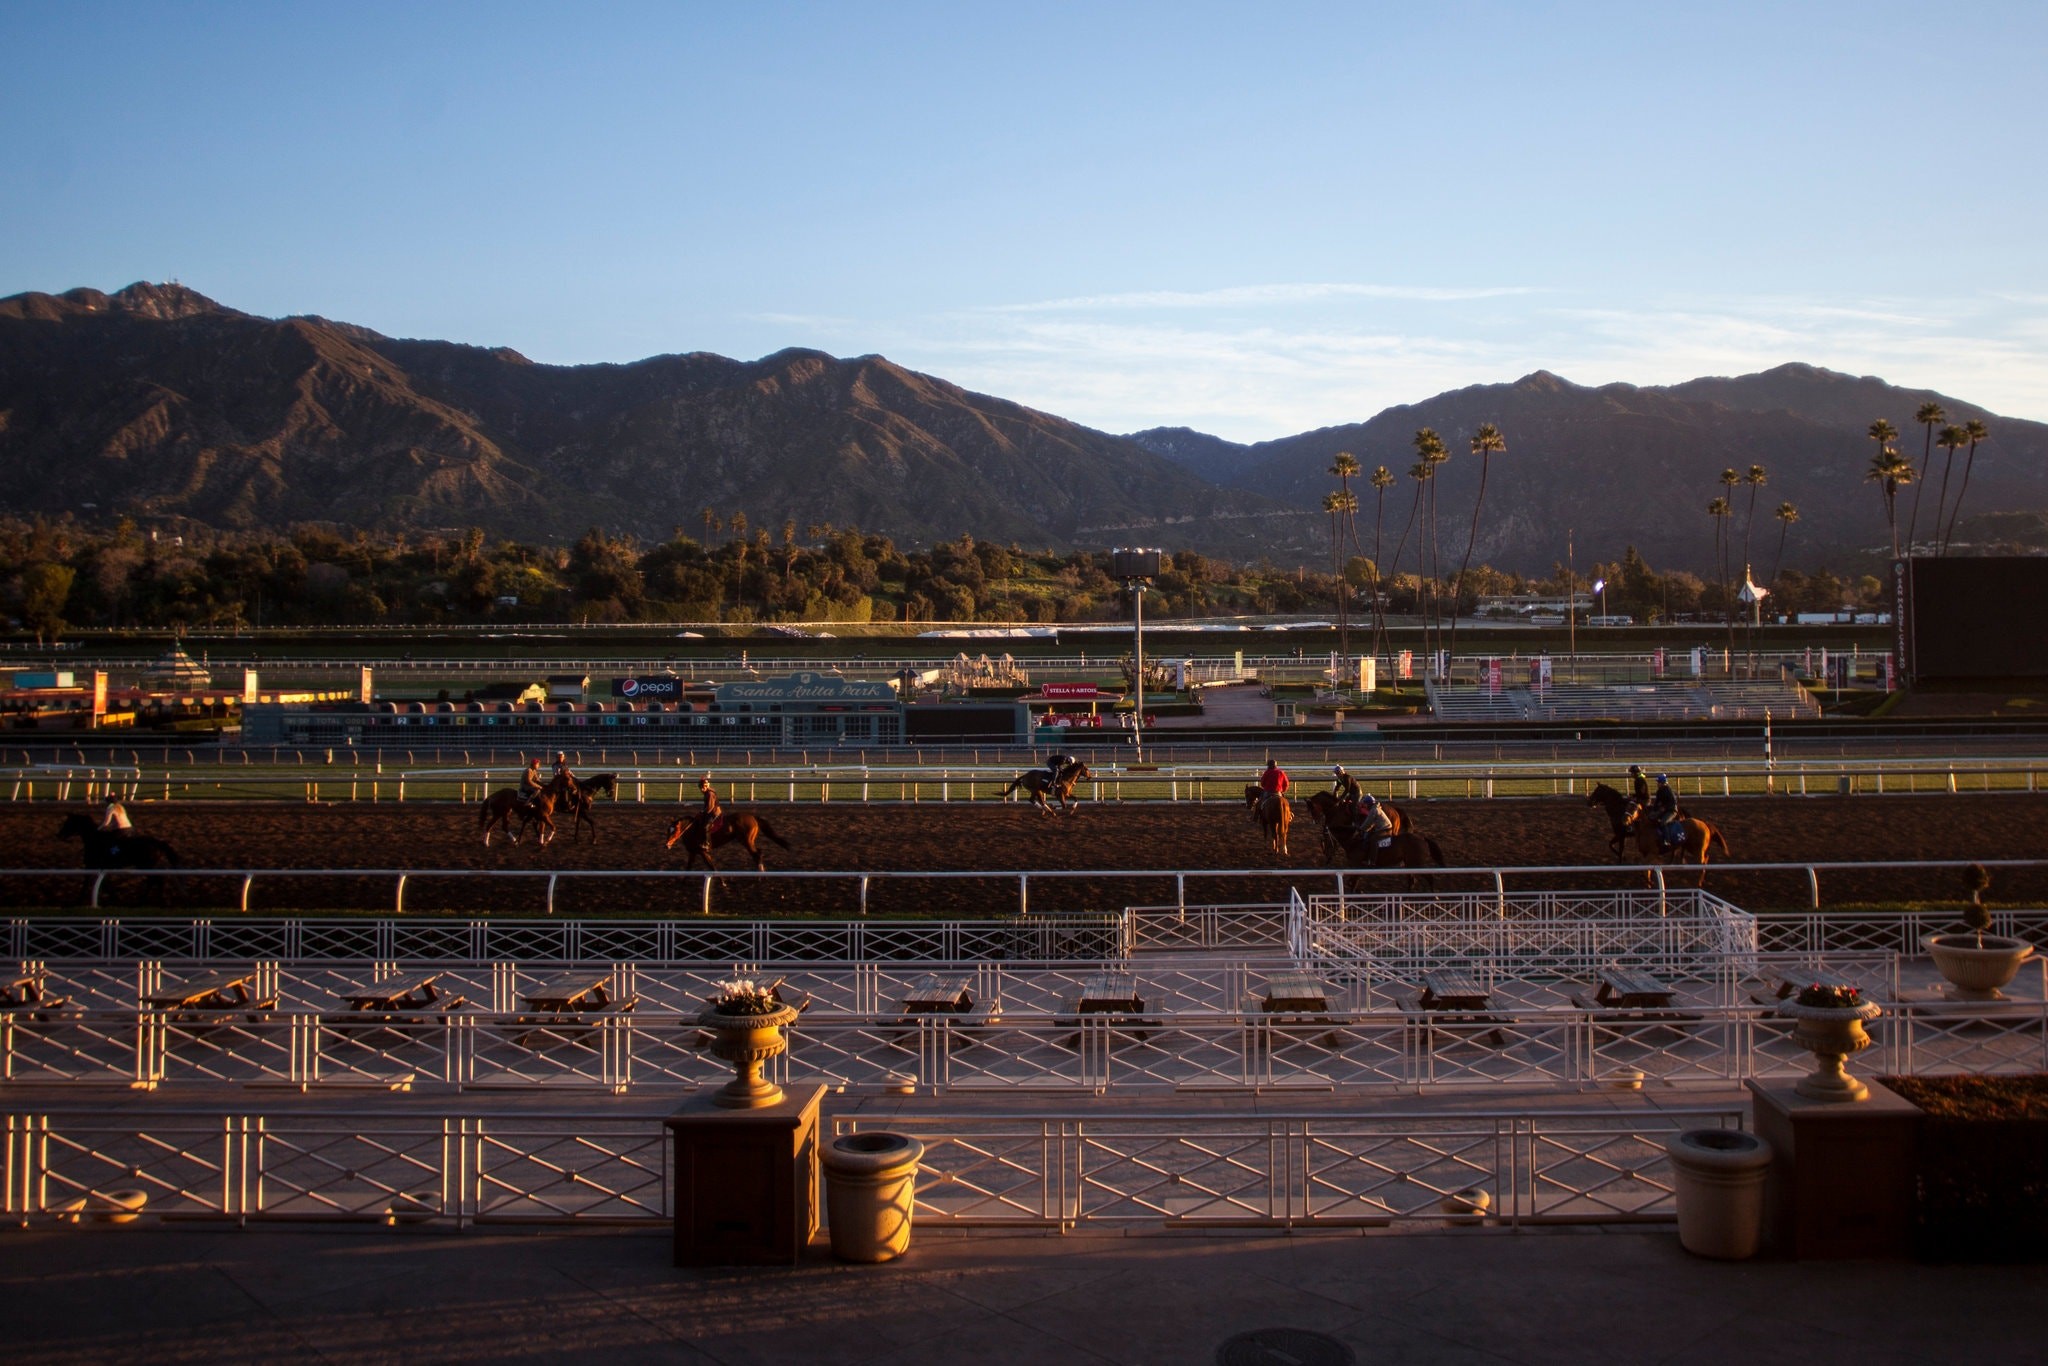 27 Racehorses Have Died at This Track Since Dec. 26